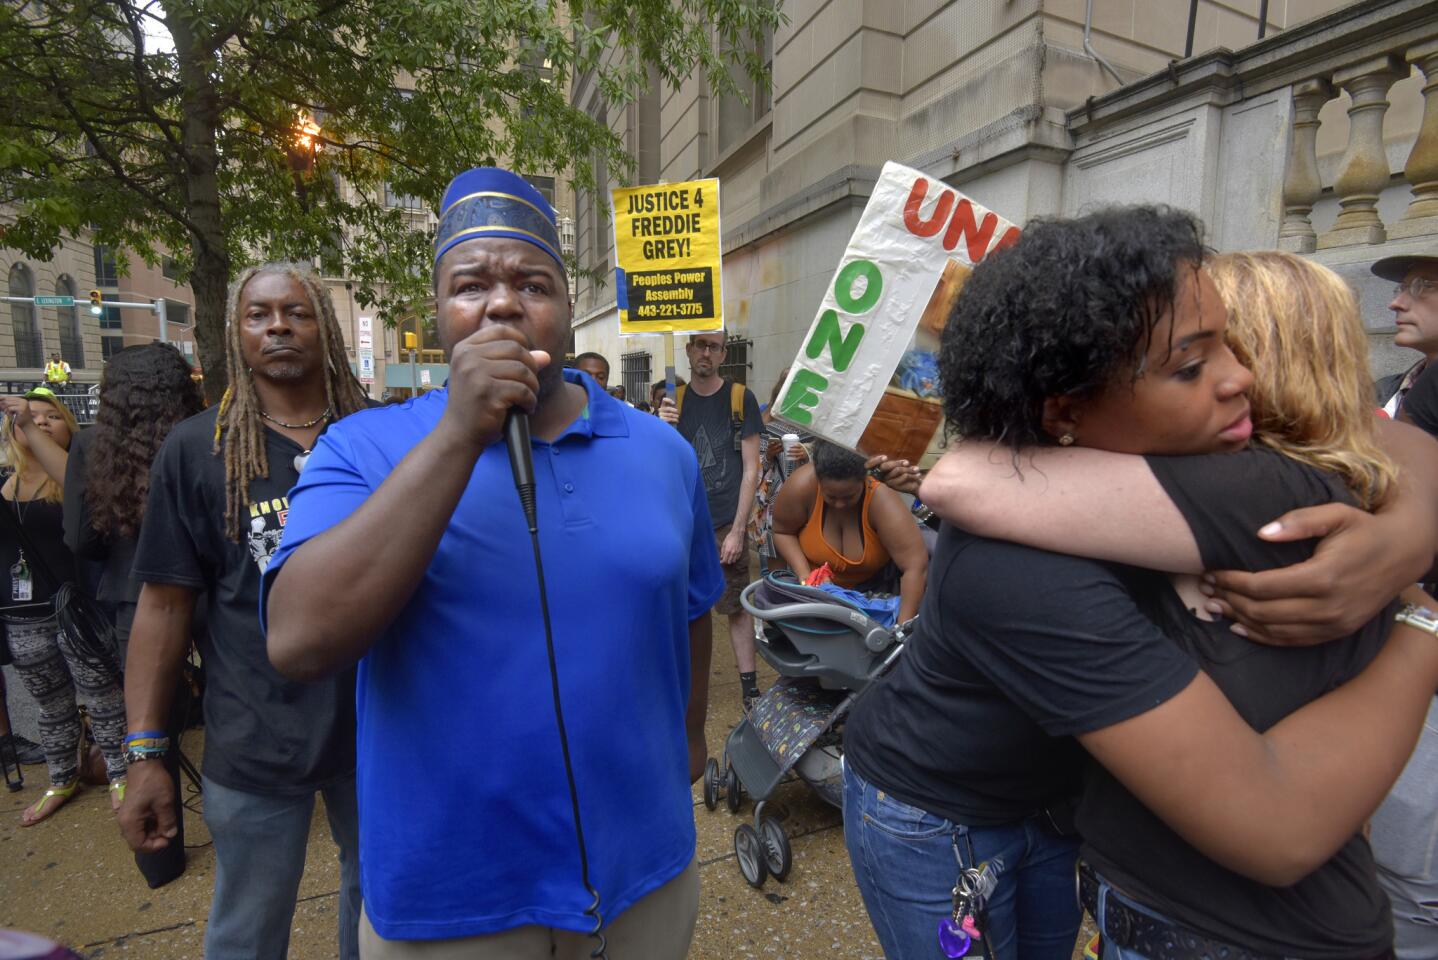 The crowd celebrates the court's decision to try in Baltimore, the cases of six officers charged in Freddie Gray's death and arrest. From left are: Lee Patterson with the Peoples Power Assembly; Rev. Cortly C.D. Witherspoon, with microphone, and Briana Walker hugging Sharon Black, far right.